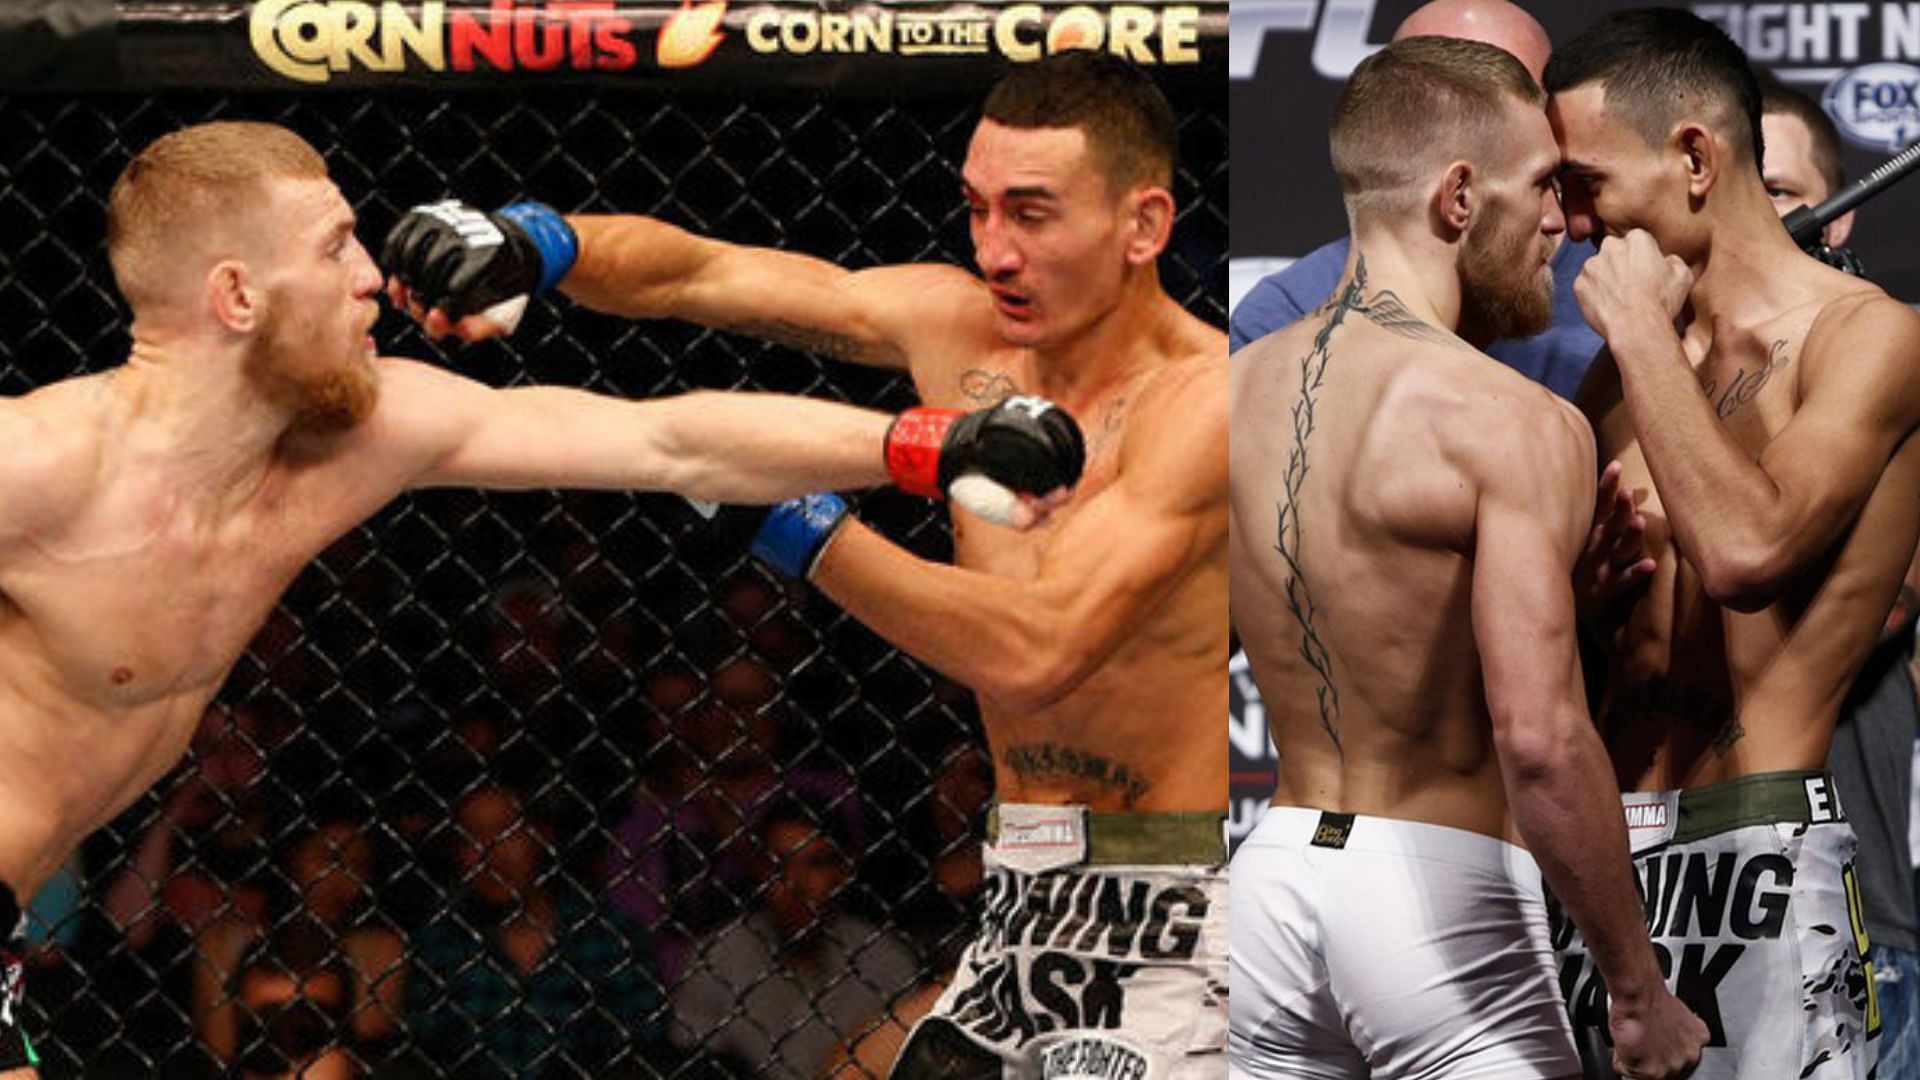 Conor McGregor vs. Max Holloway [Images courtesy of Getty]